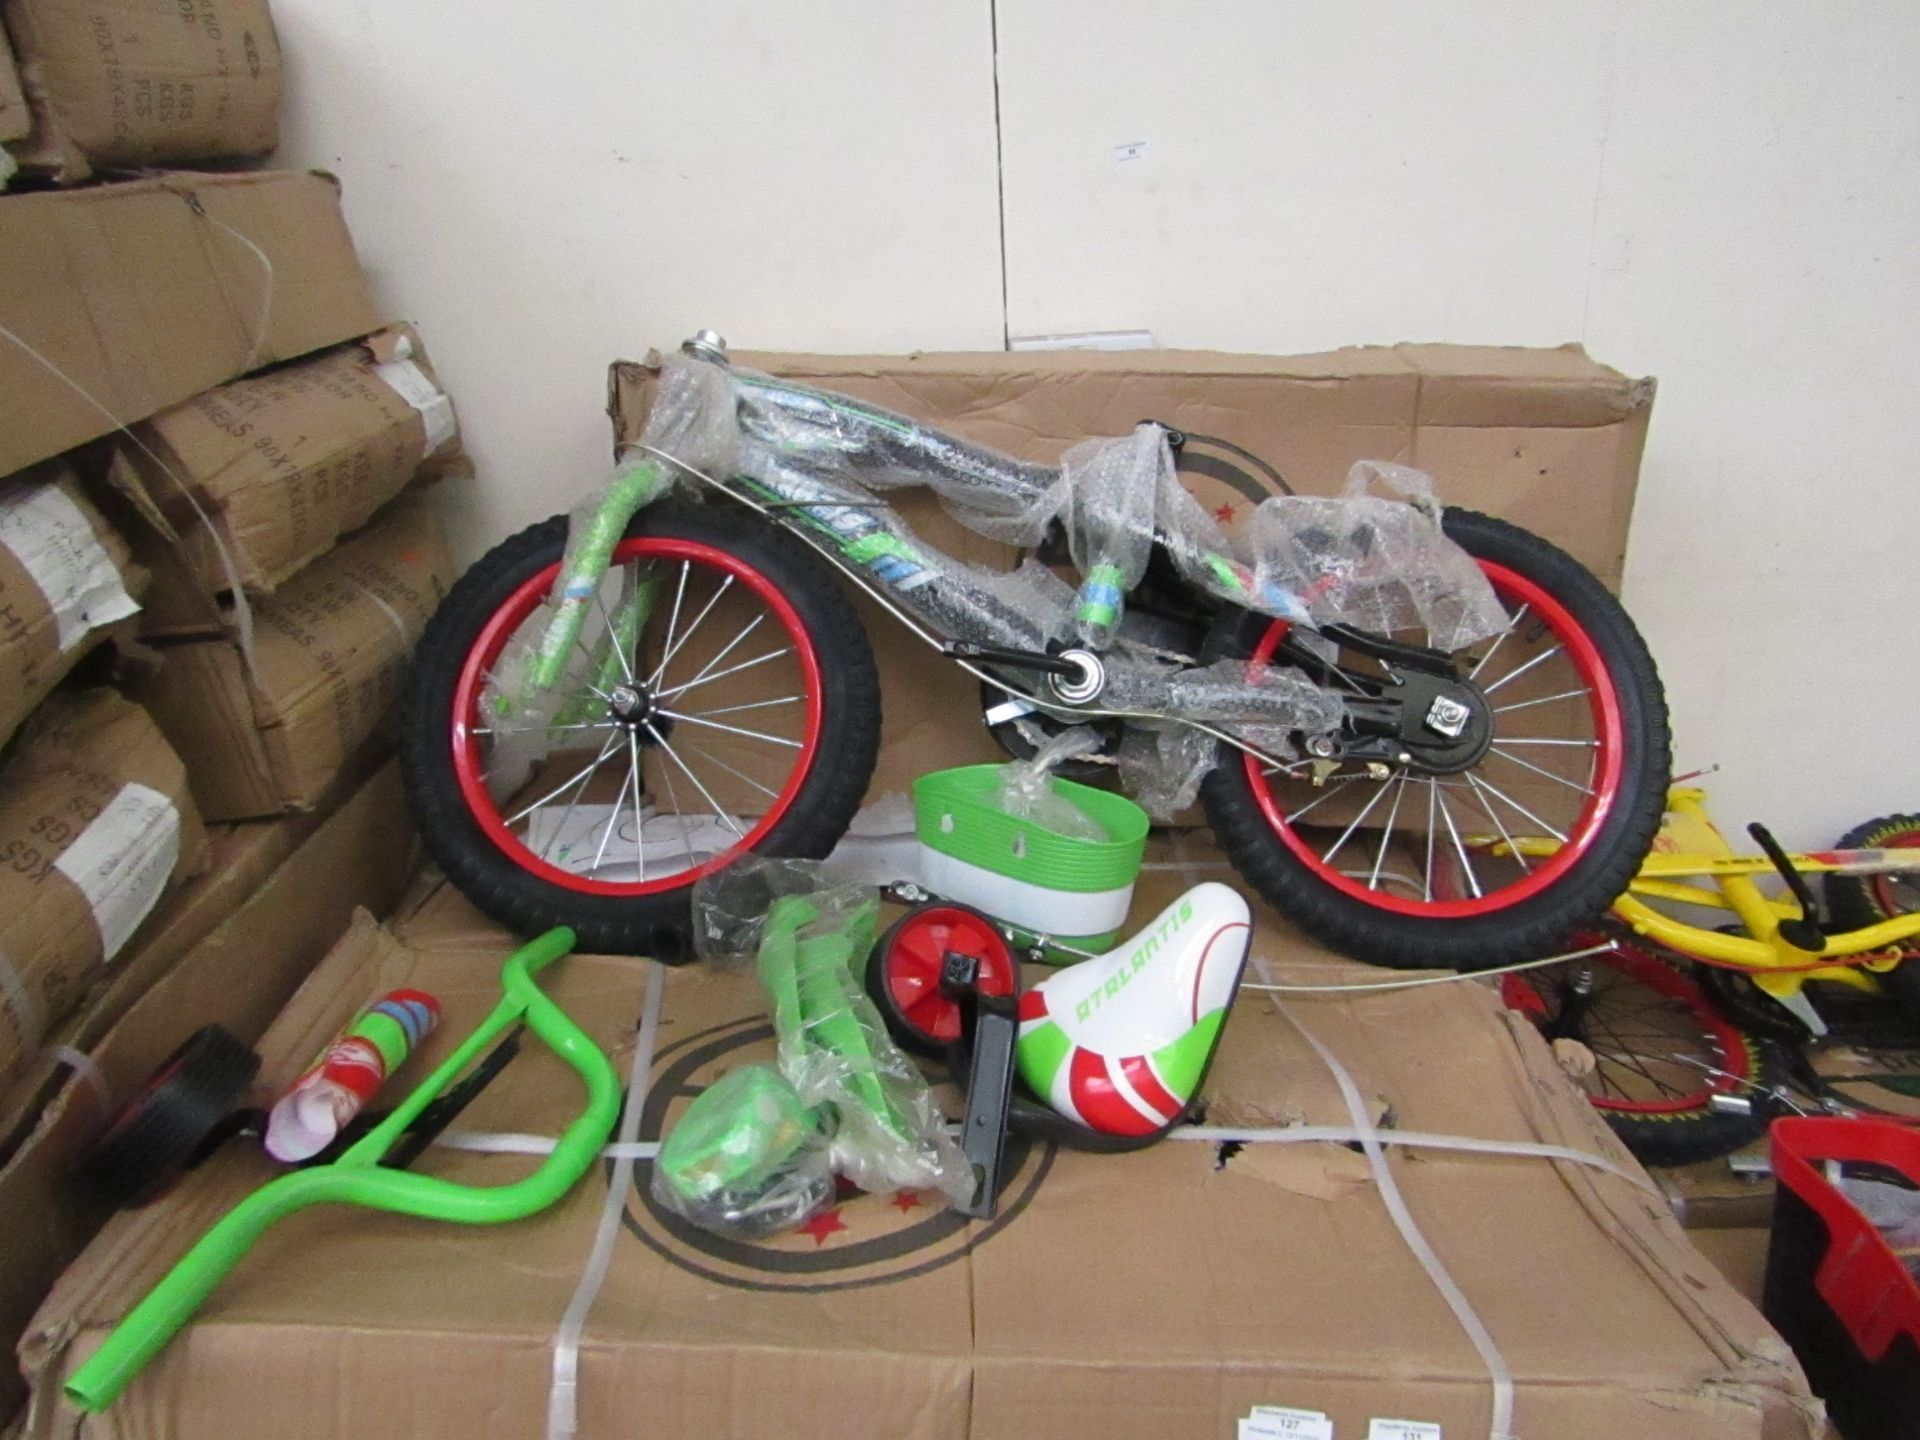 16" Child's Bike new and Boxed, comes complete with front basket, mud guards, water bottle and